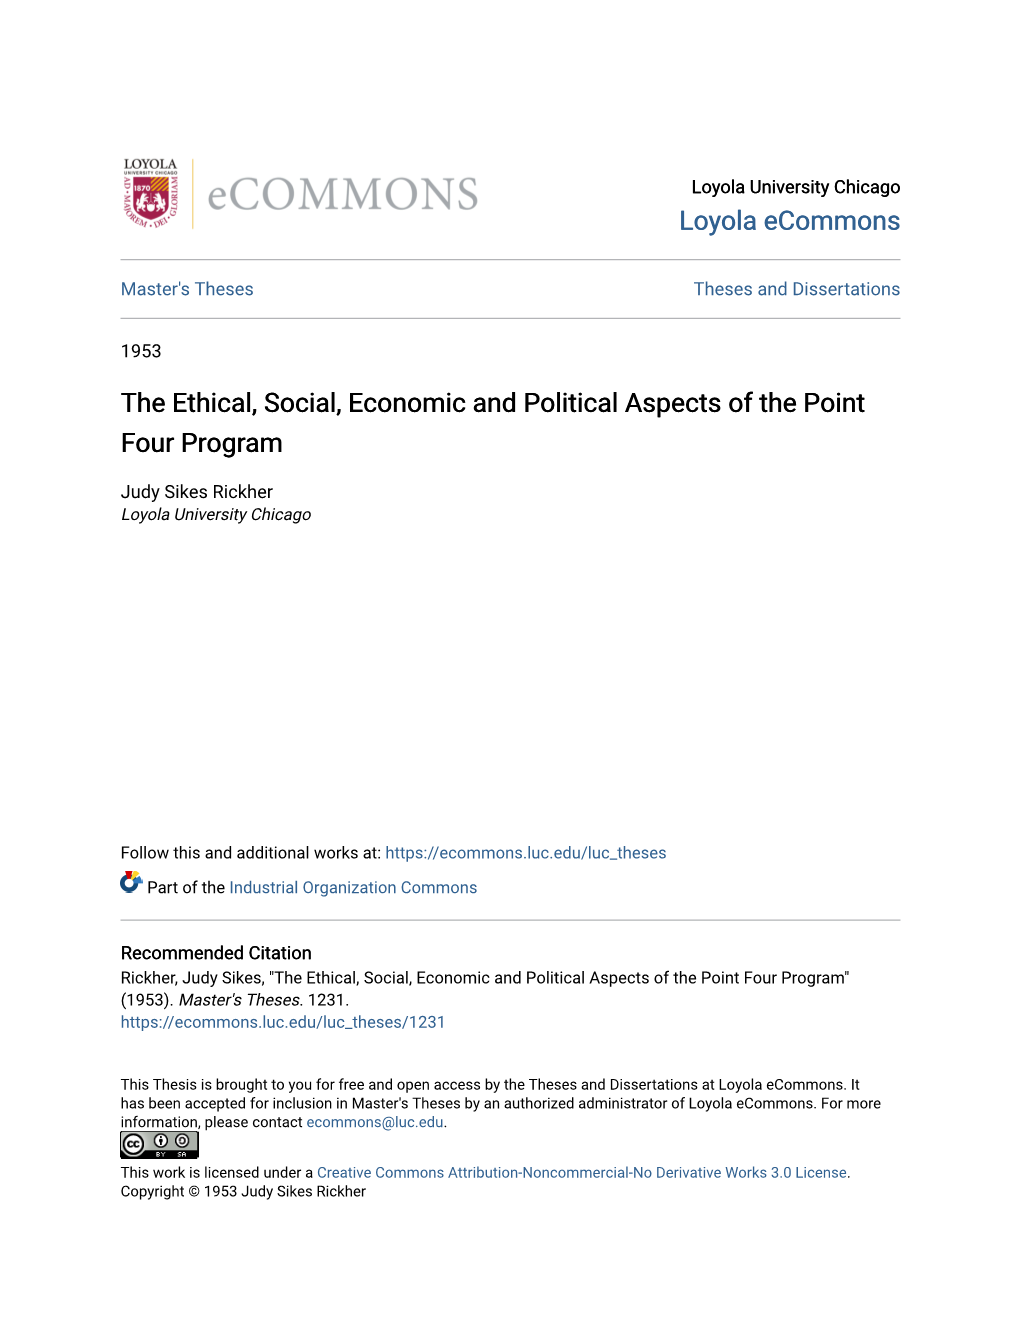 The Ethical, Social, Economic and Political Aspects of the Point Four Program